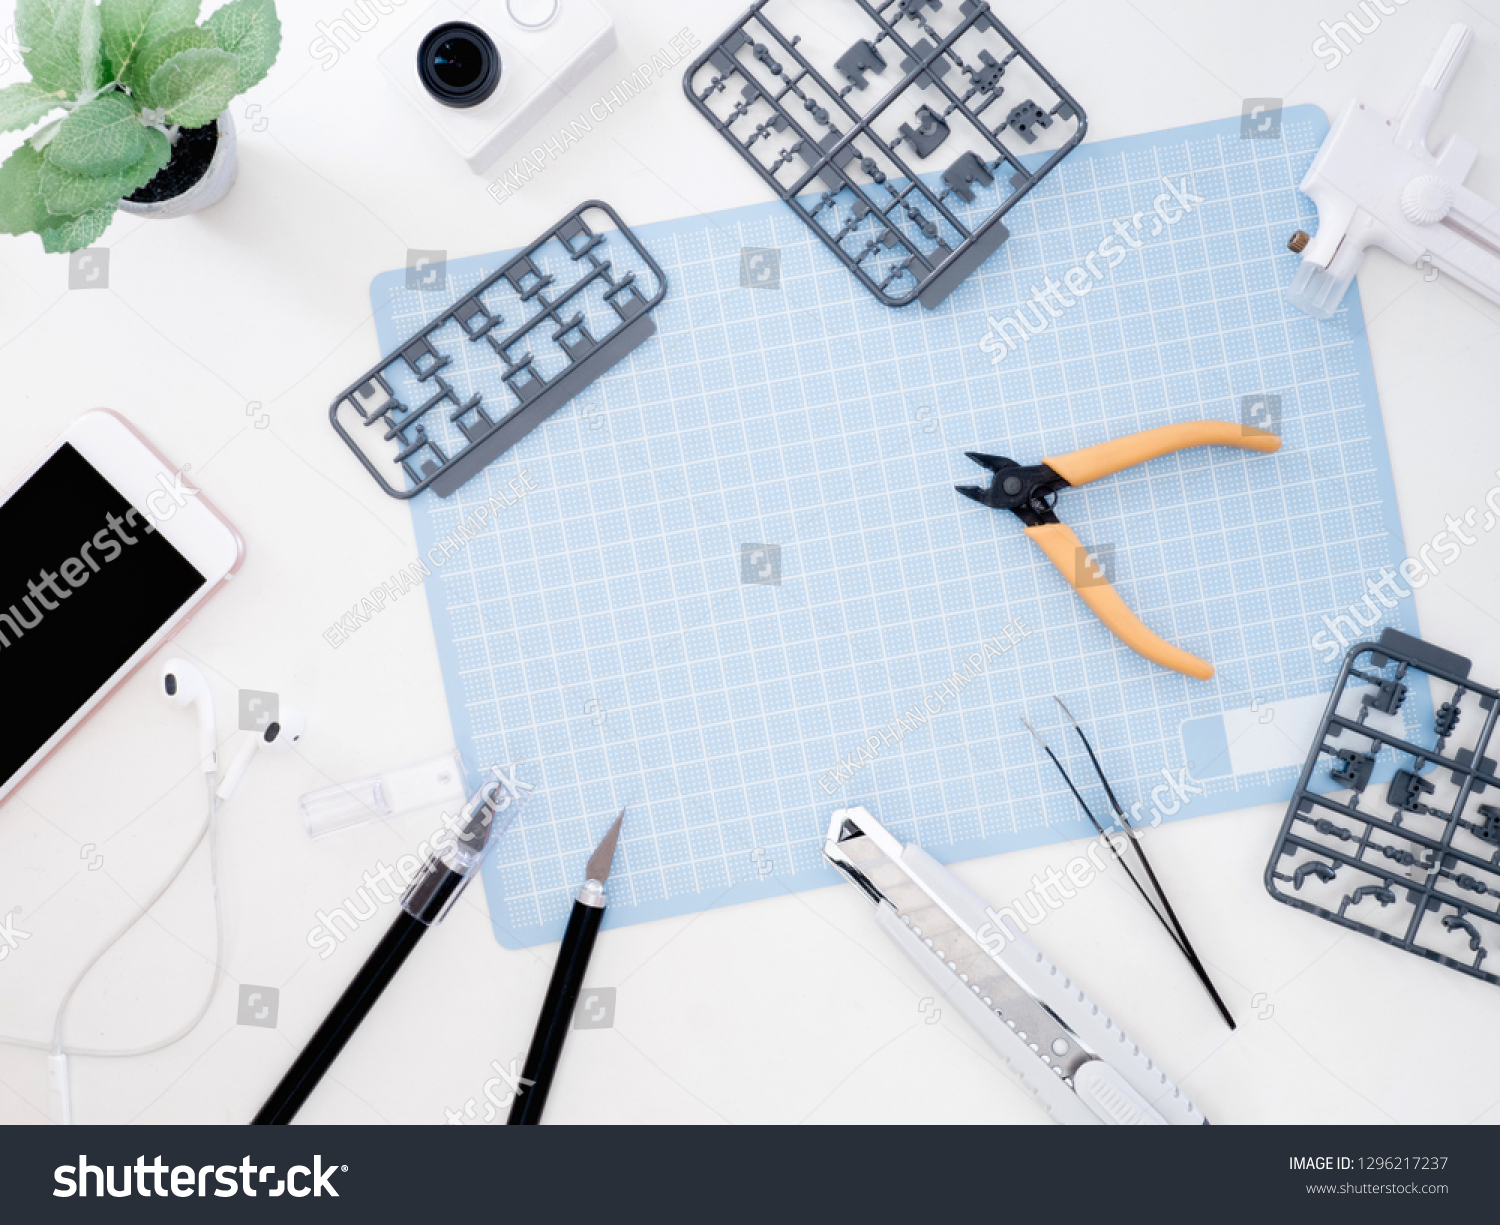 top view of hobbies concept with cutting mat, Plastic model part kits and tool kits on white background with copy space. #1296217237